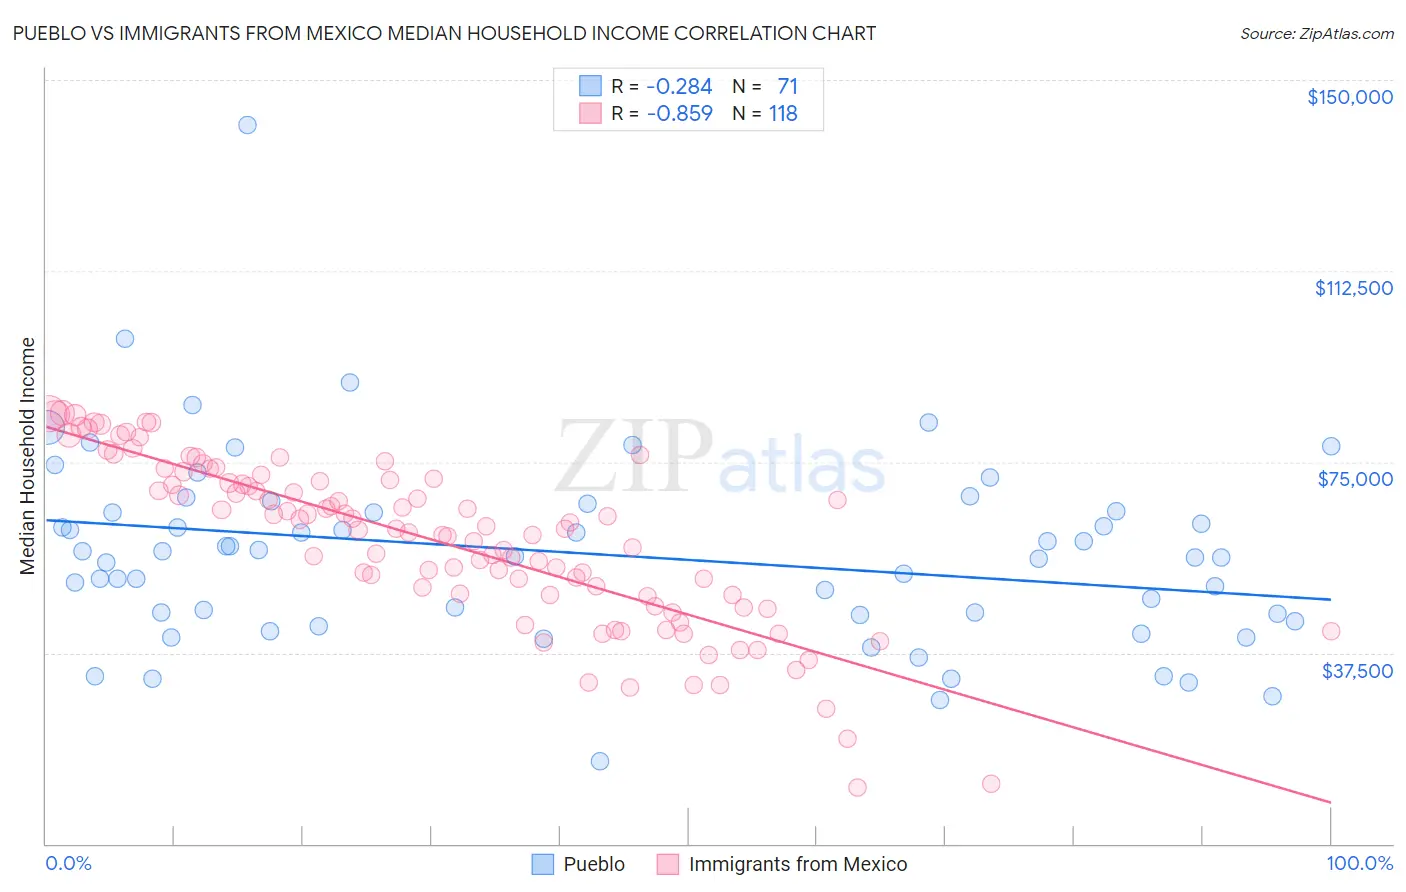 Pueblo vs Immigrants from Mexico Median Household Income